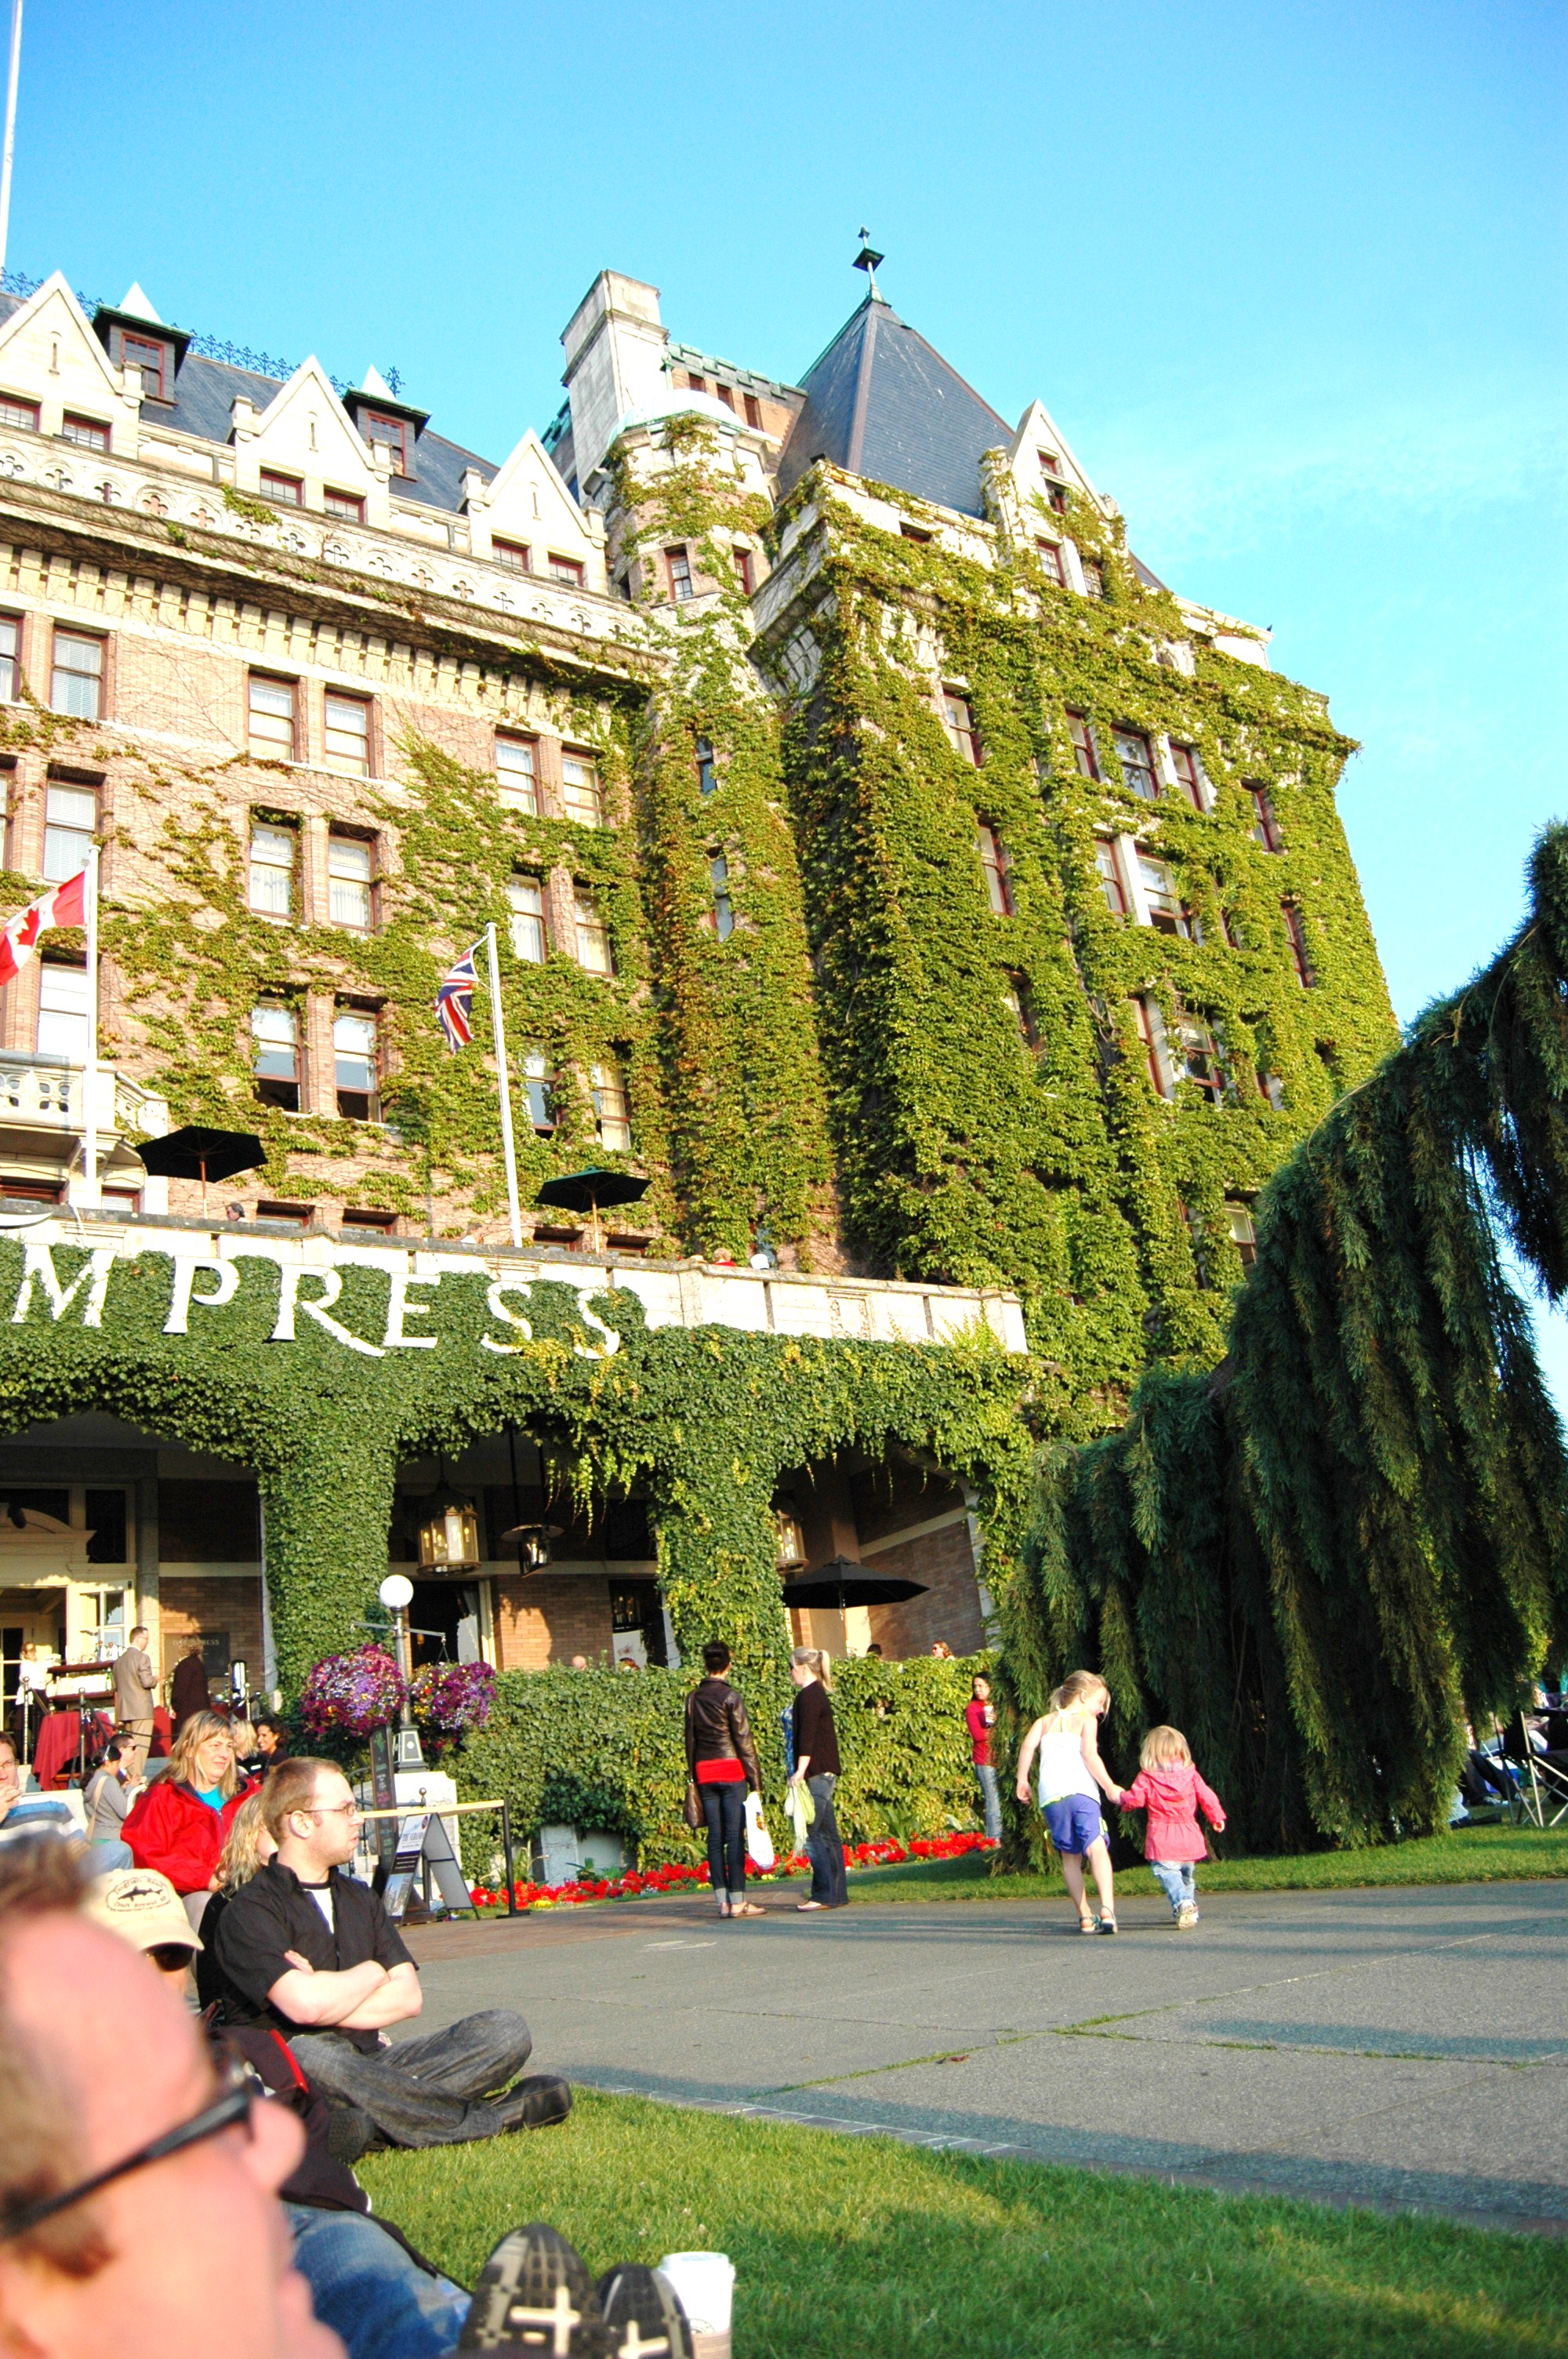 Hip Hotel: Fairmont Empress: Victoria BC is One Hip, Walkable City for Families